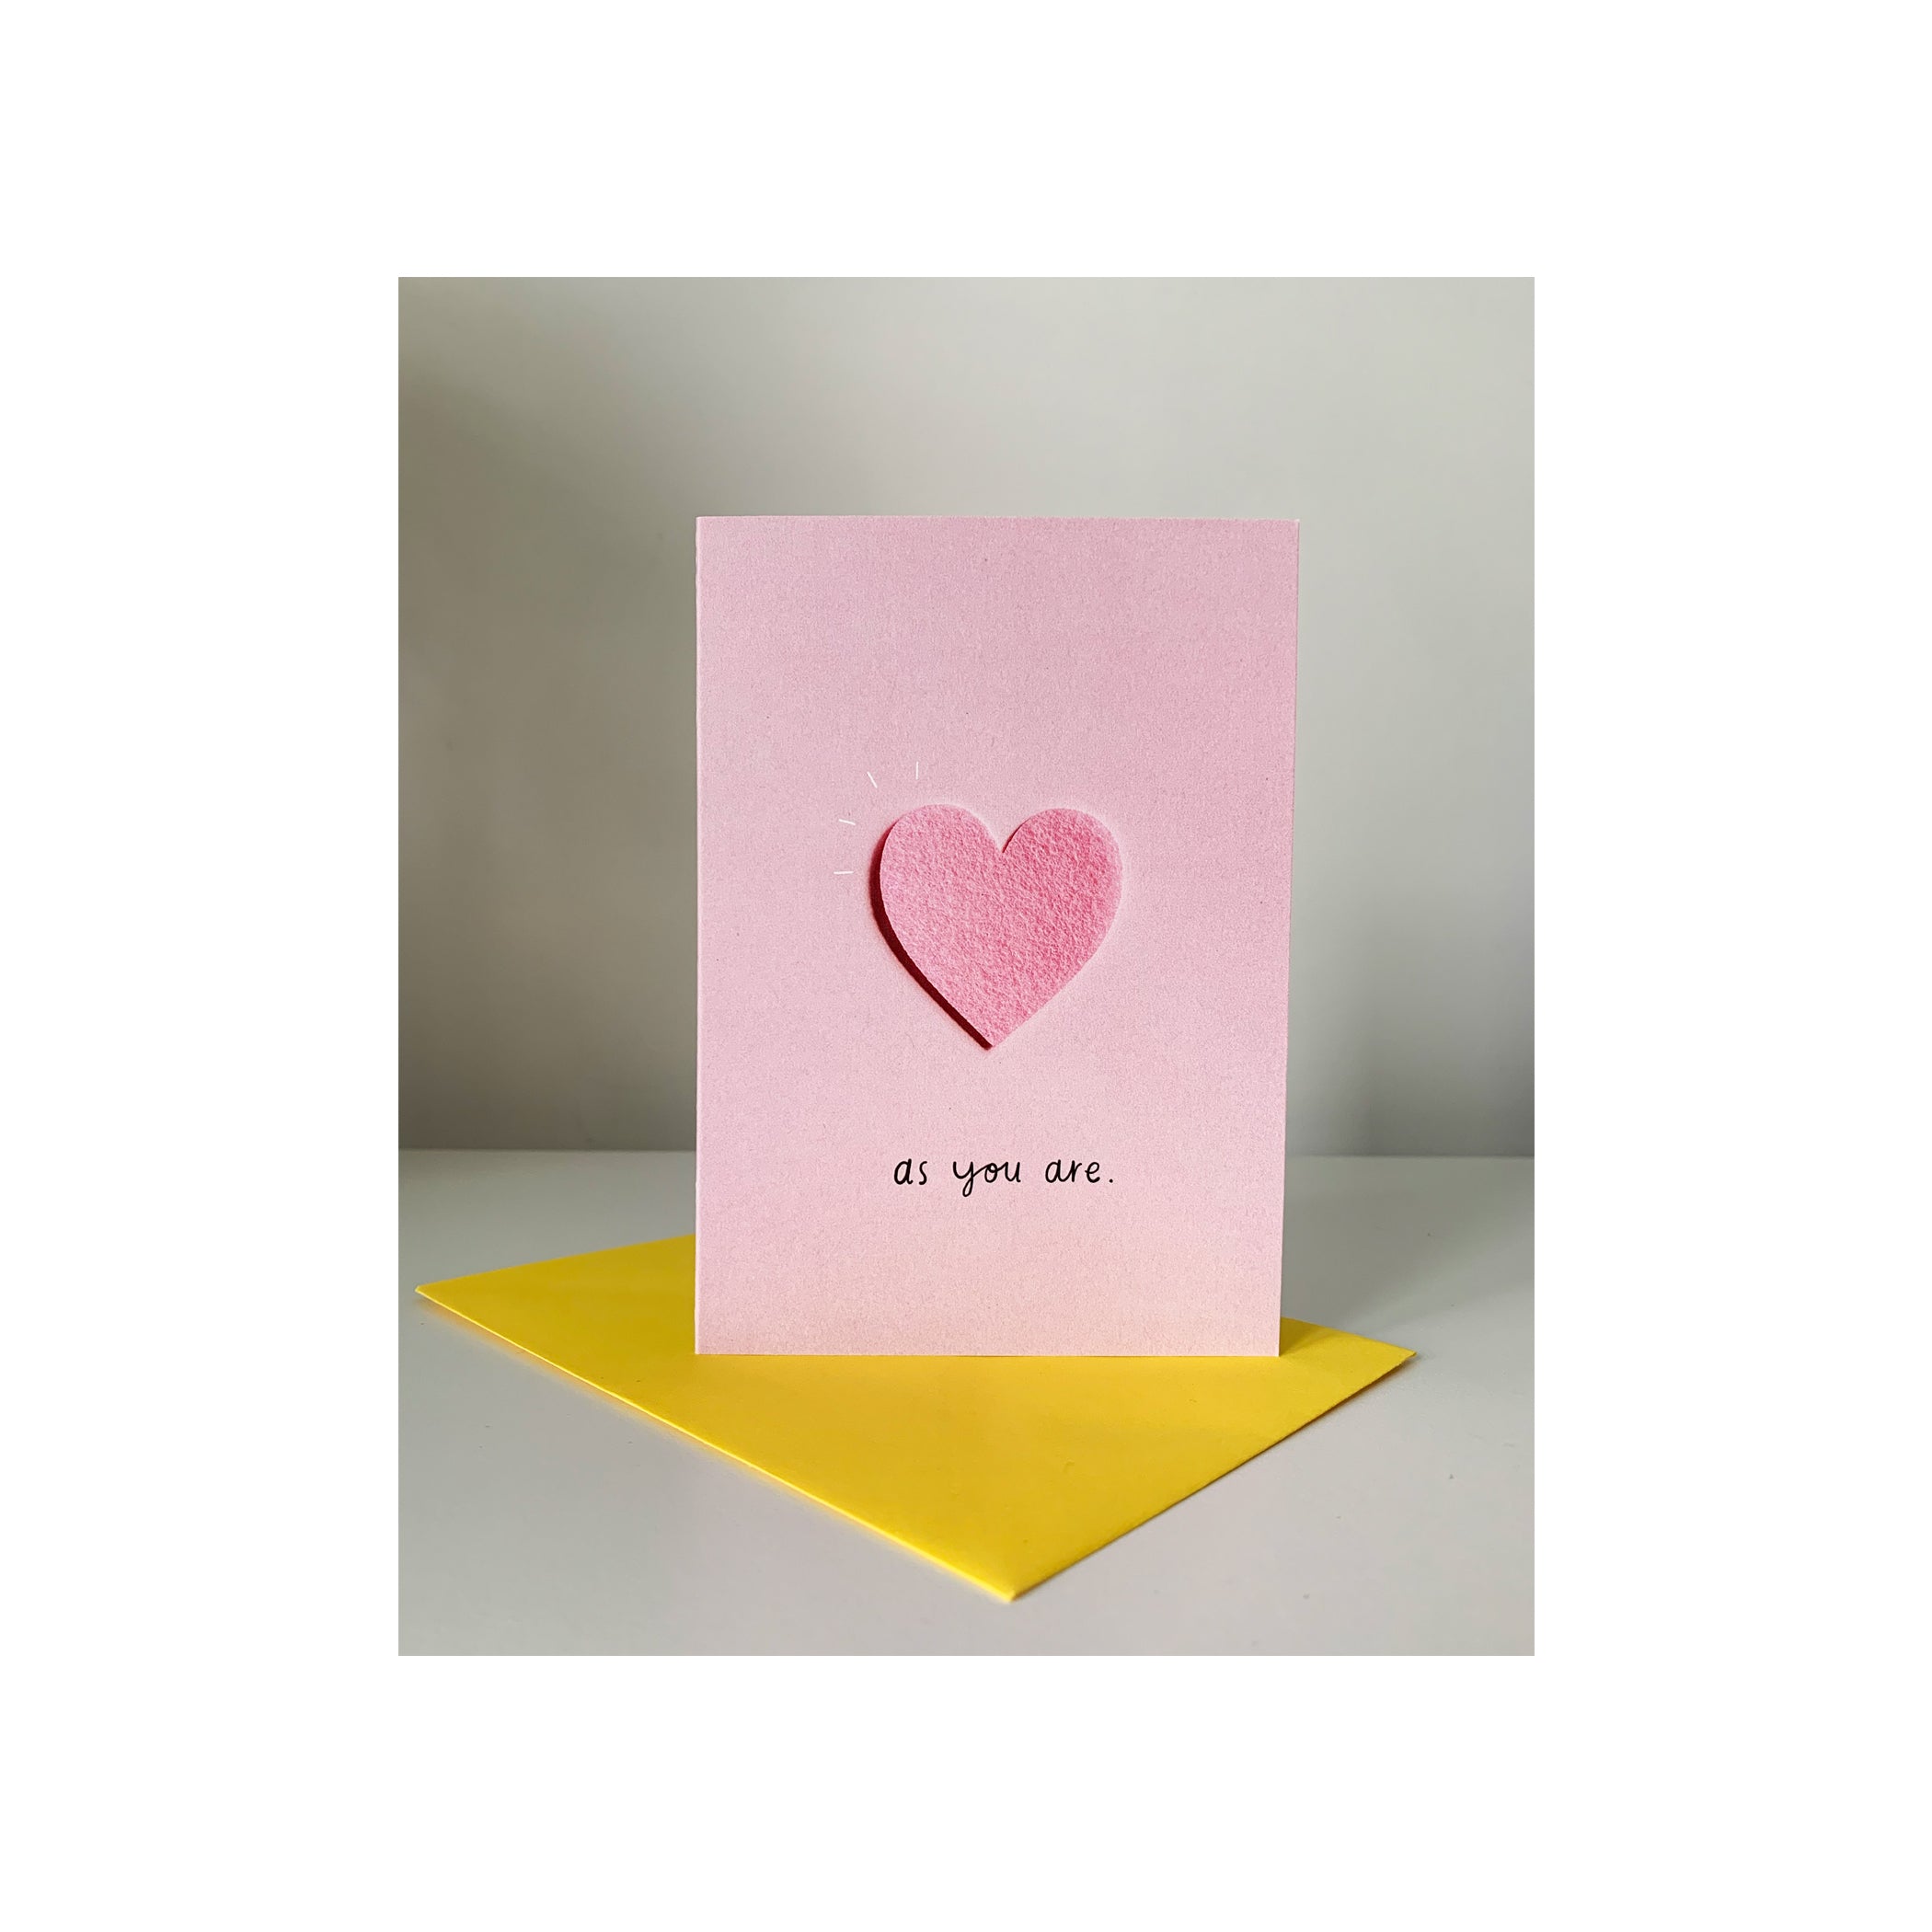 As You Are ✨ Greetings card with a coloured envelope - 100% planet-friendly materials